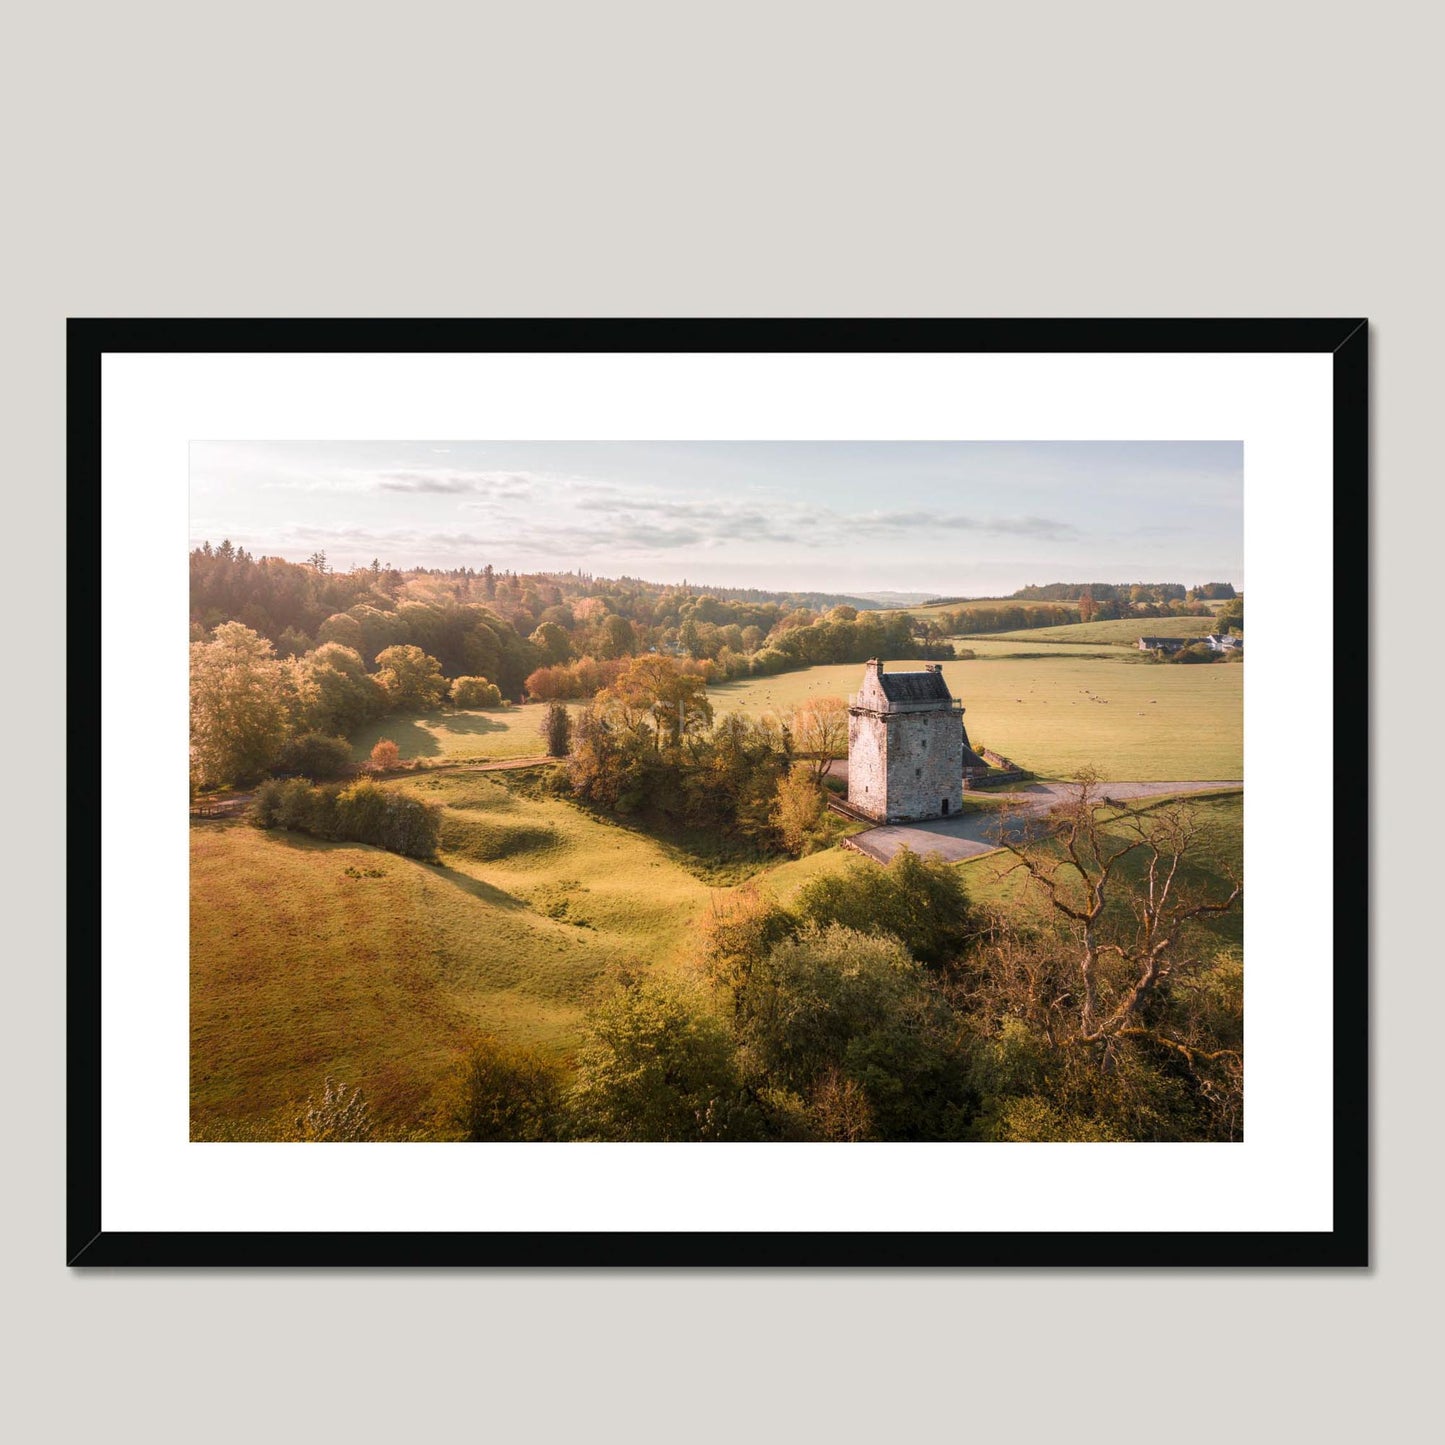 Clan Armstrong - Gilnockie Tower - Framed & Mounted Landscape Photography Print 28"x20" Black